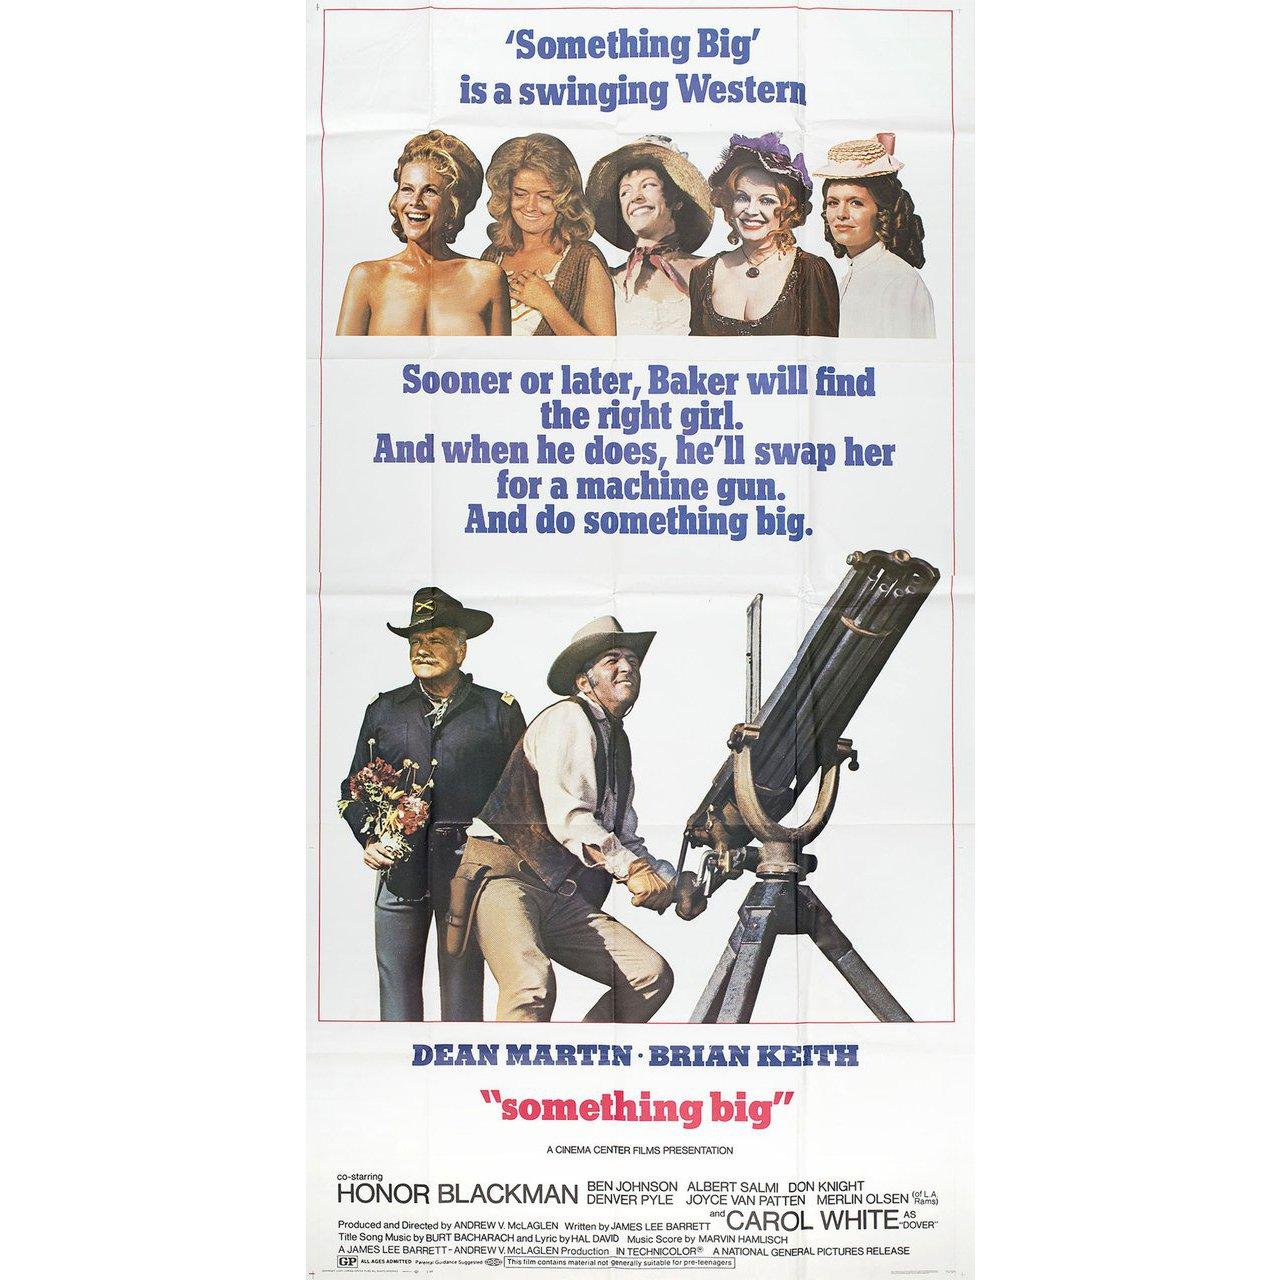 Original 1971 U.S. three sheet poster for the film “Something Big” directed by Andrew V. McLaglen with Dean Martin / Brian Keith / Carol White / Honor Blackman. Very good-fine condition, folded. Many original posters were issued folded or were